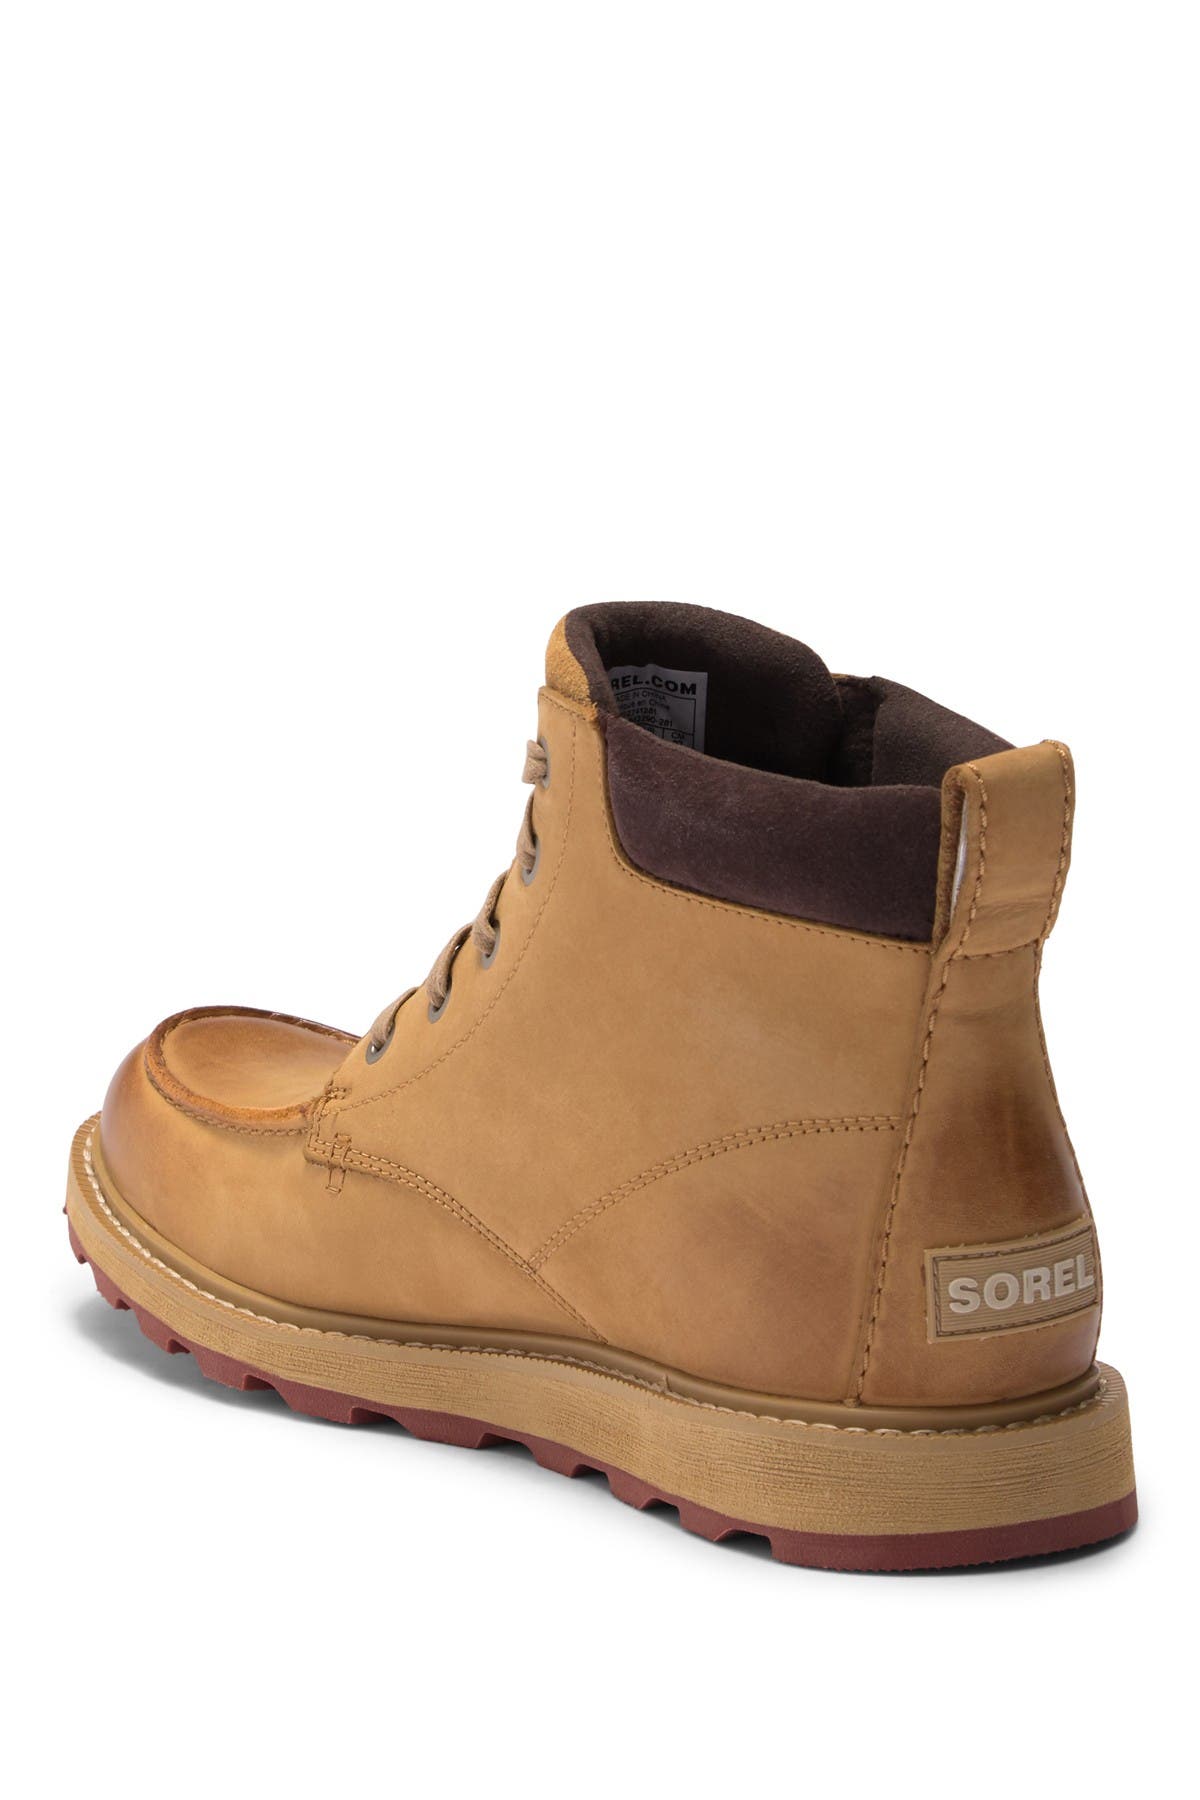 Madson Moc Toe Waterproof Leather Boot 